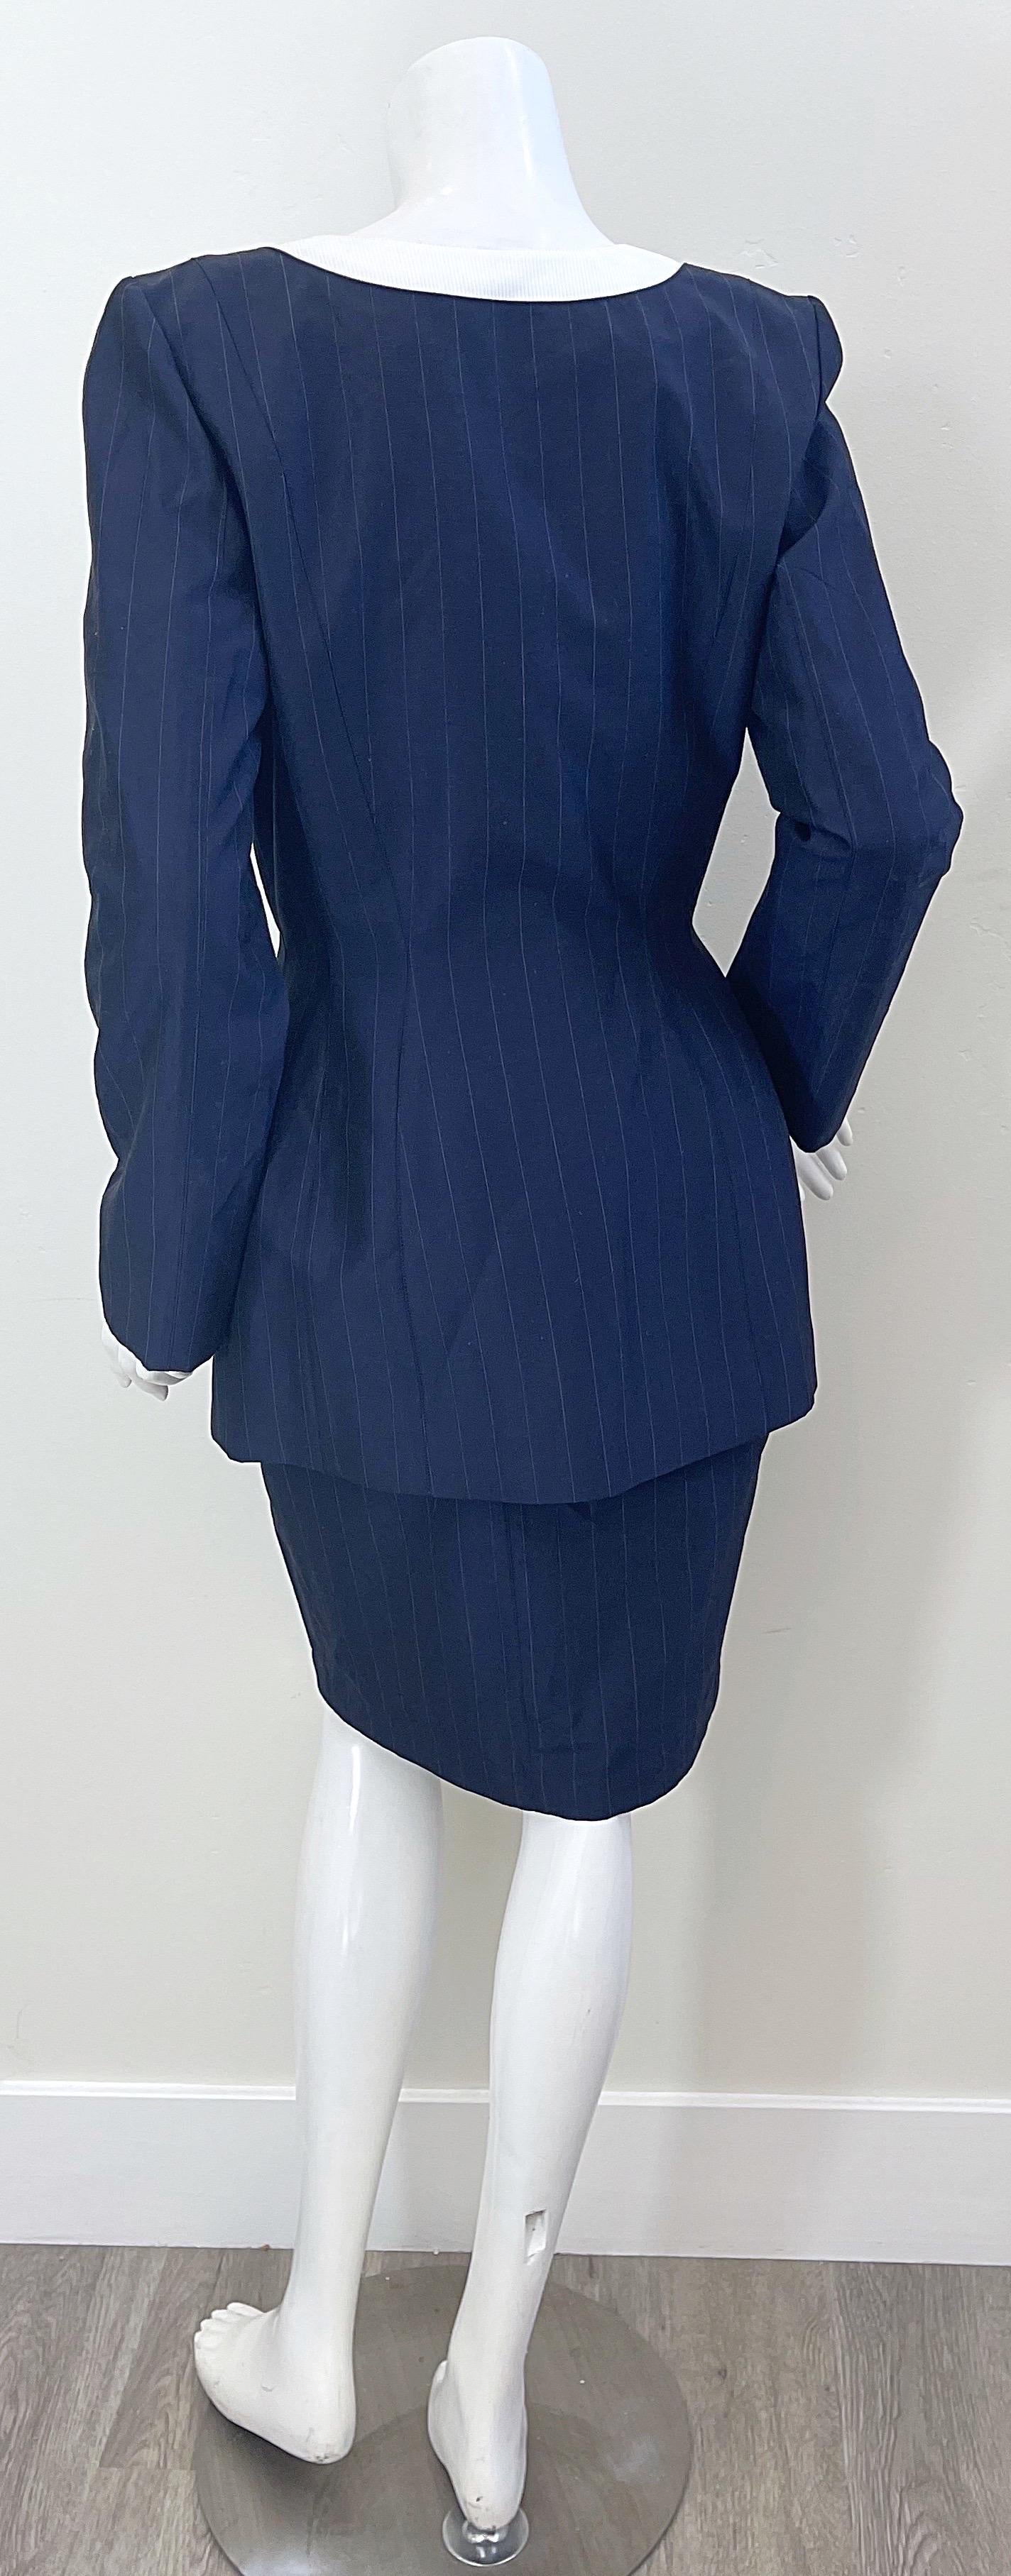 NWT 1990s Thierry Mugler Navy Blue Pinstripe Size 4 Vintage 90s Skirt Suit For Sale 1